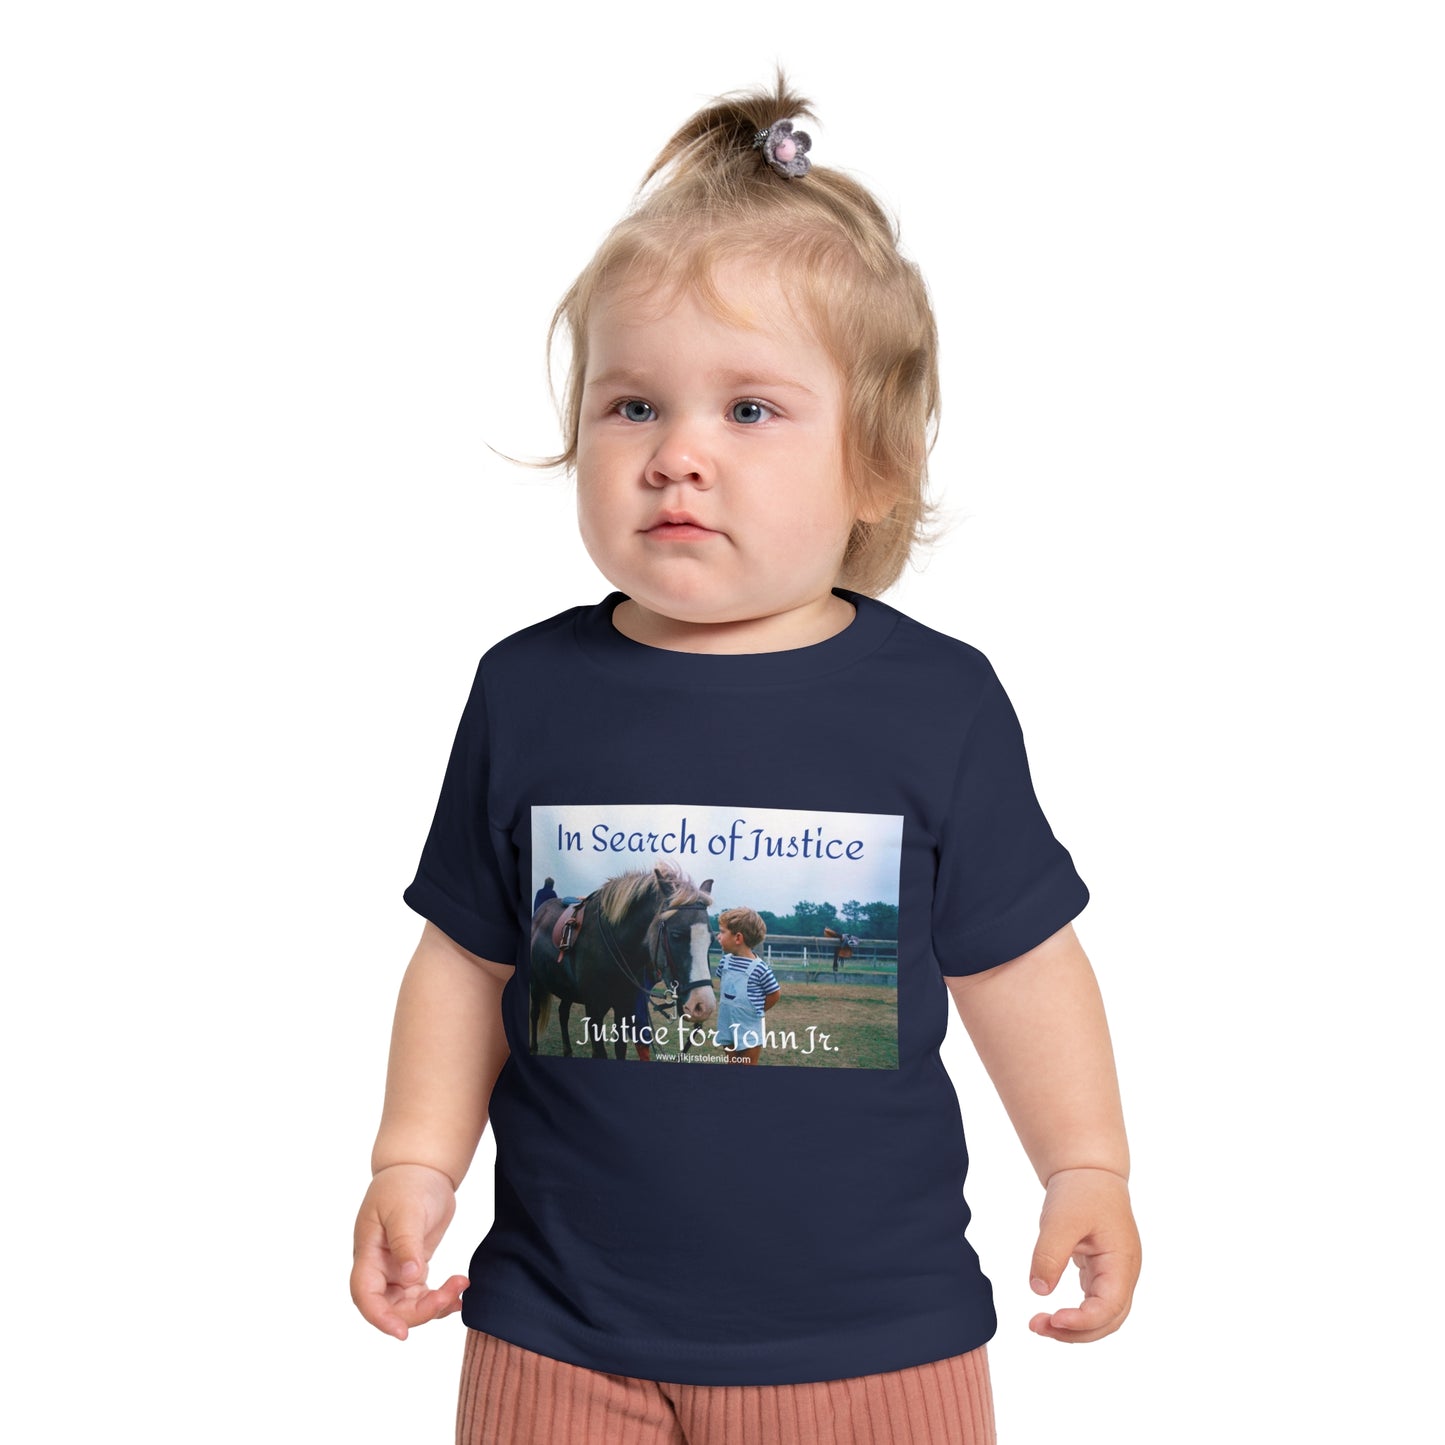 In Search of Justice for John Jr. Baby Short Sleeve T-Shirt